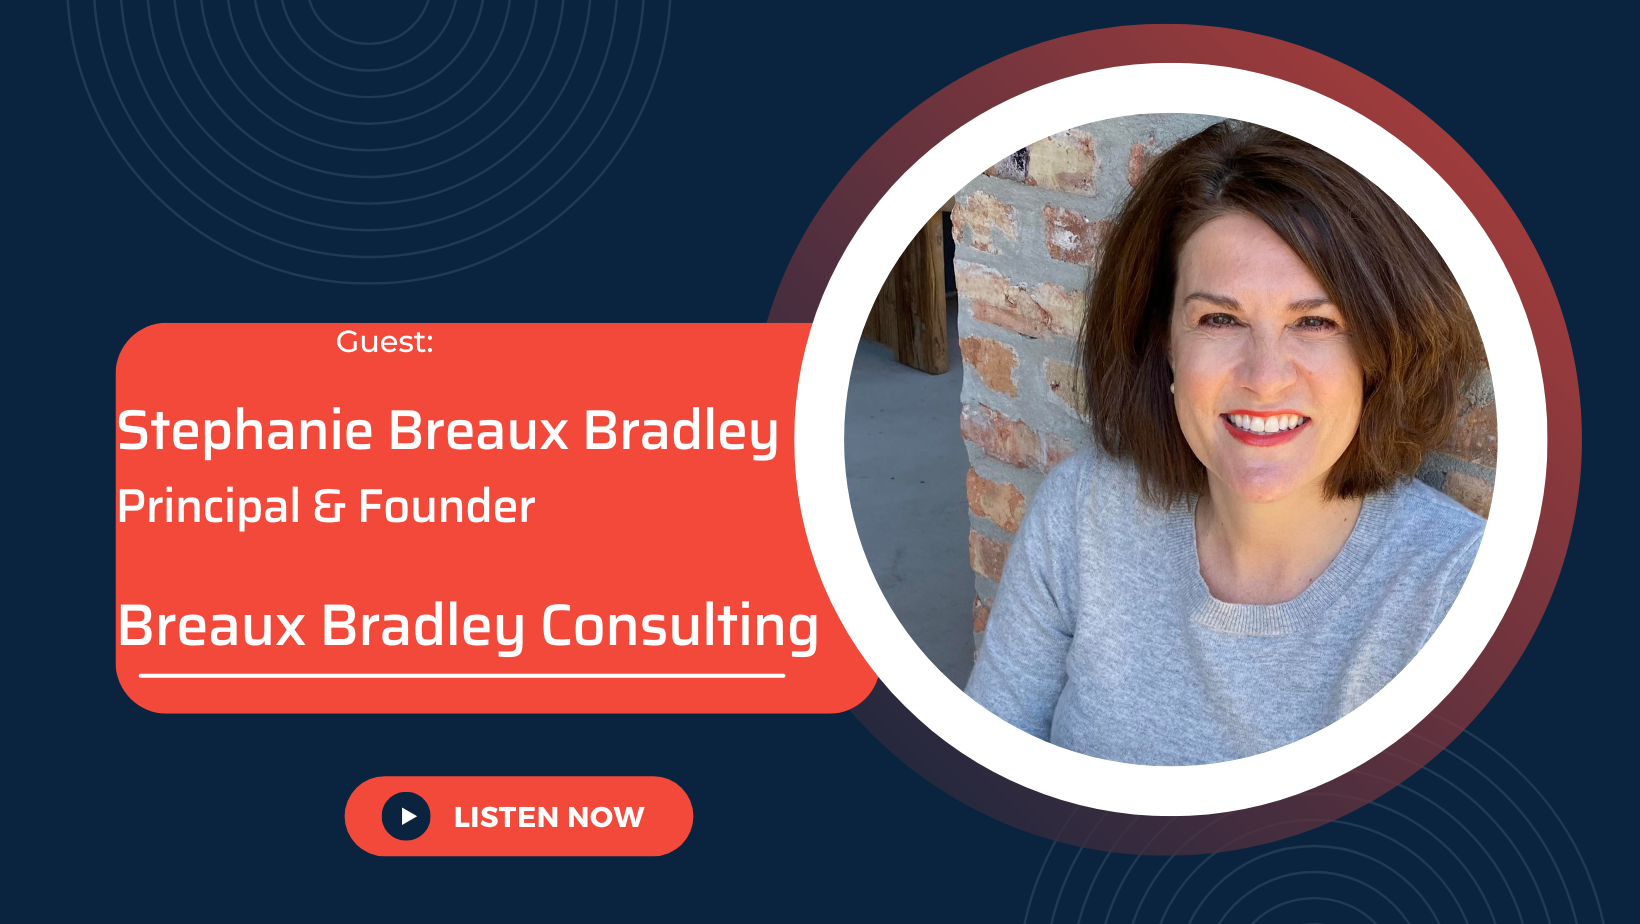 How To Convert Leads & Grow Your Fitness Business with the Founder of Breaux Bradley Consulting, Stephanie Breaux Bradley